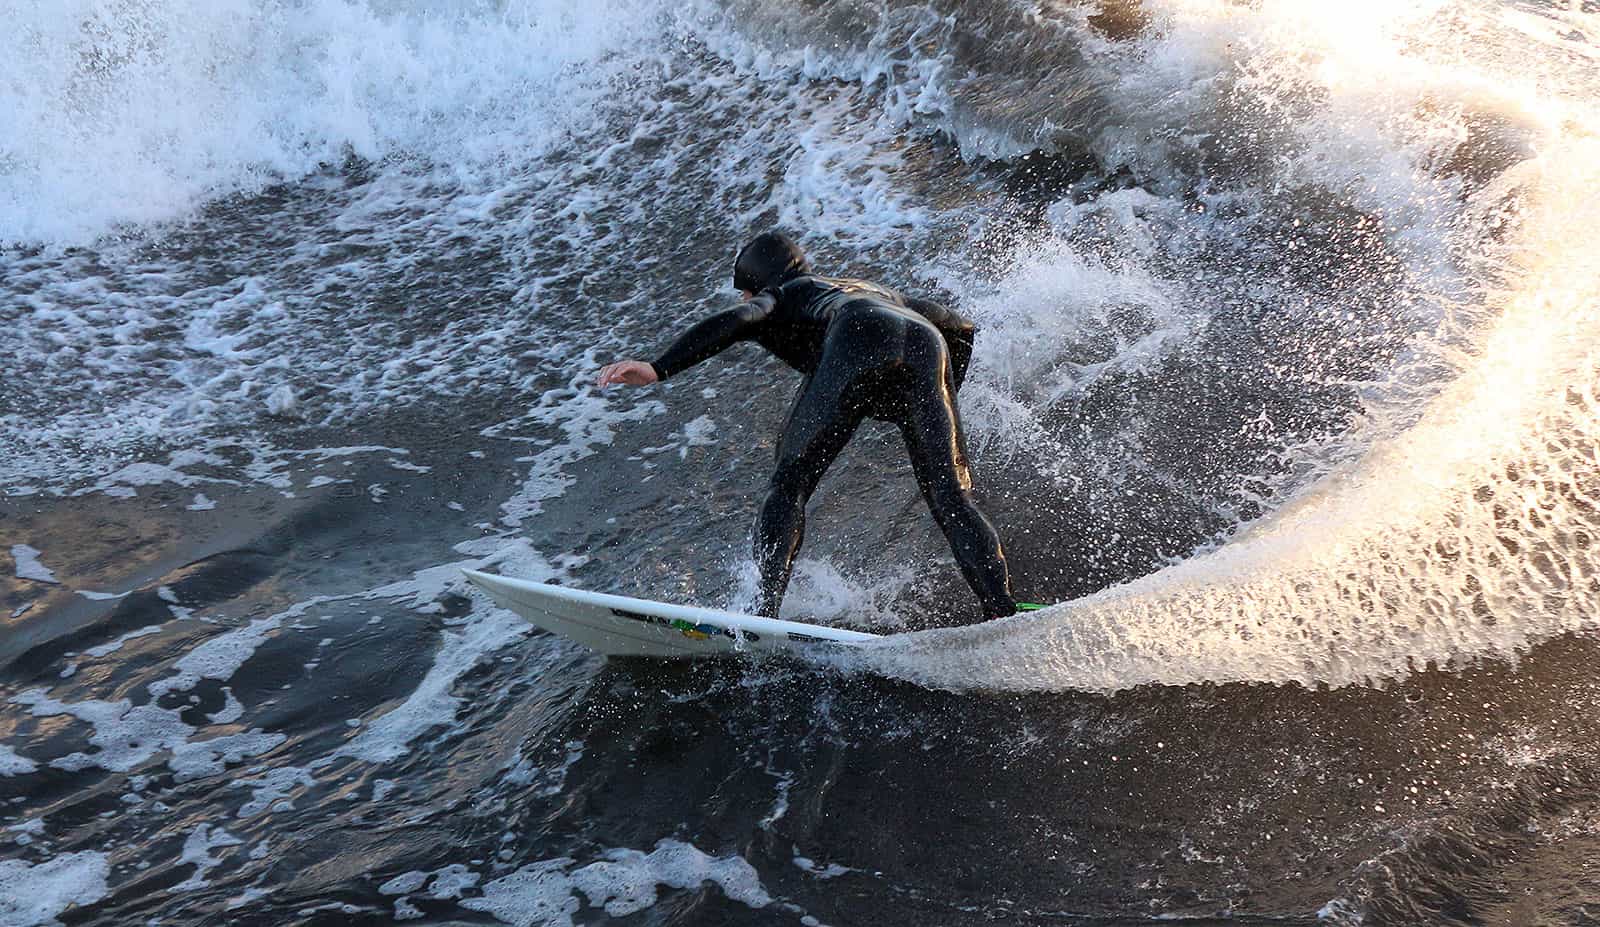 Surfer and water drops in the sun.